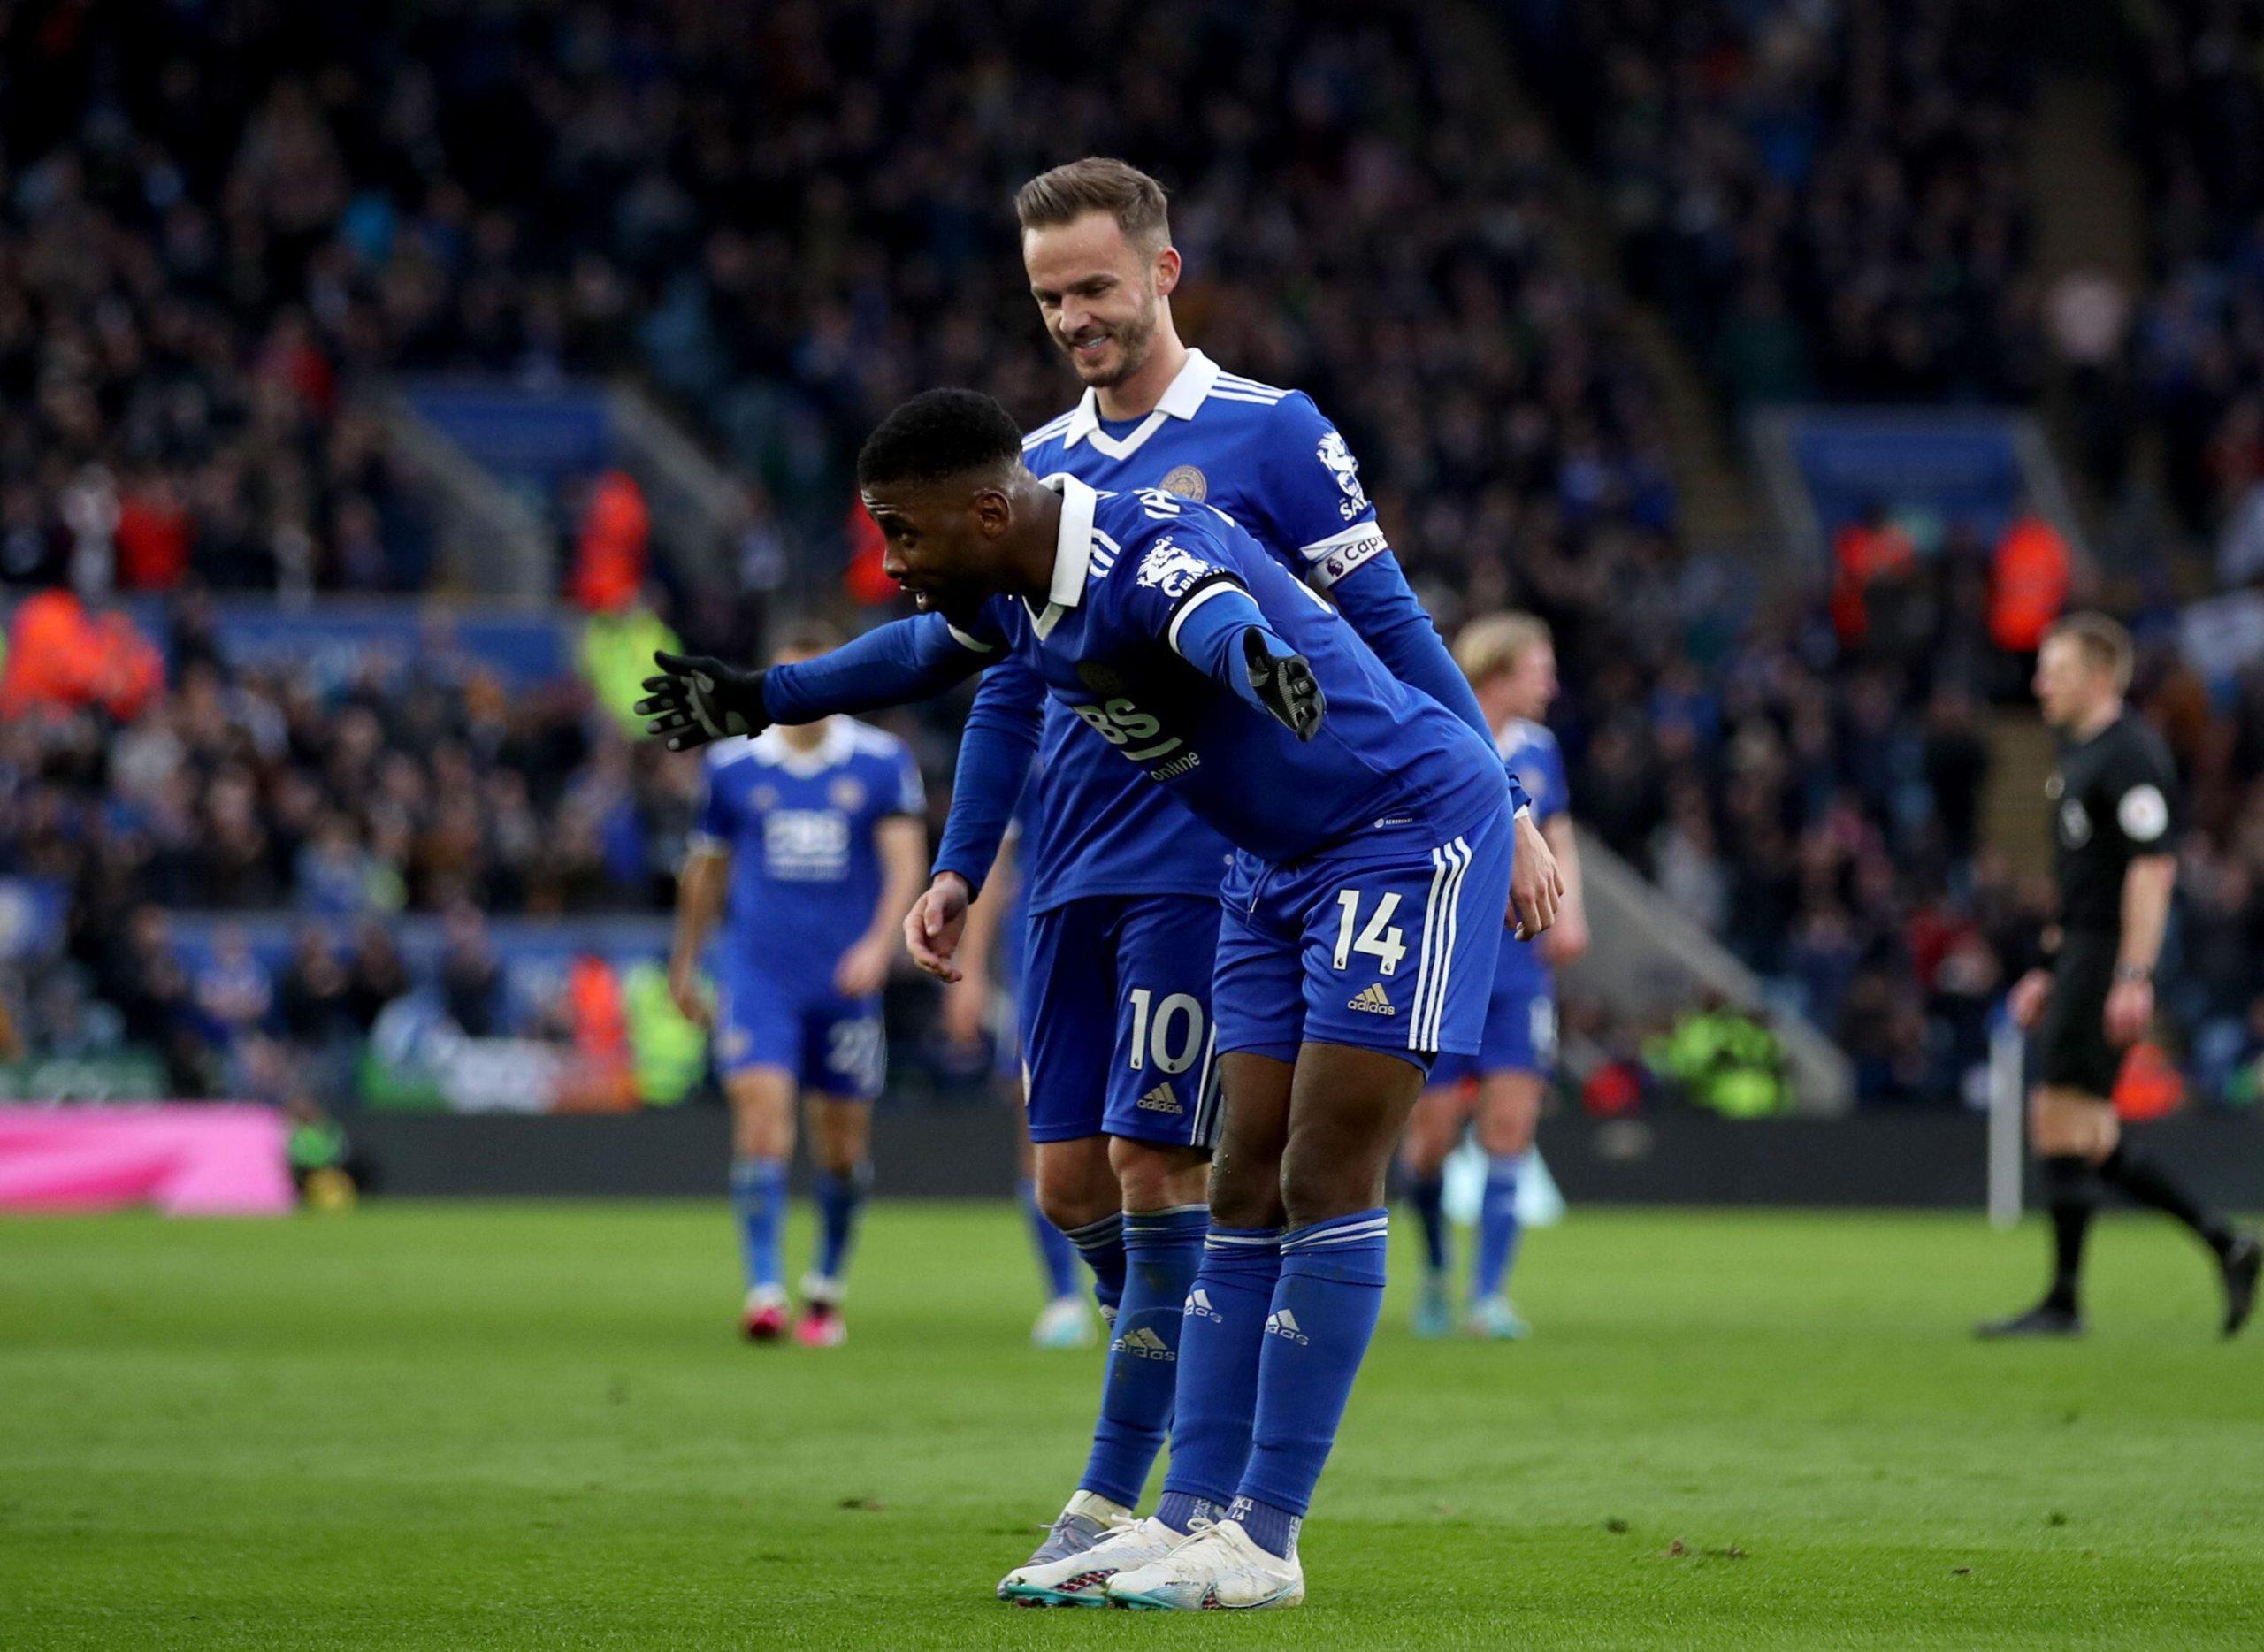 Kelechi Iheanacho tries his hand in Peter Drury’s role, recalling Leicester vs. Everton match